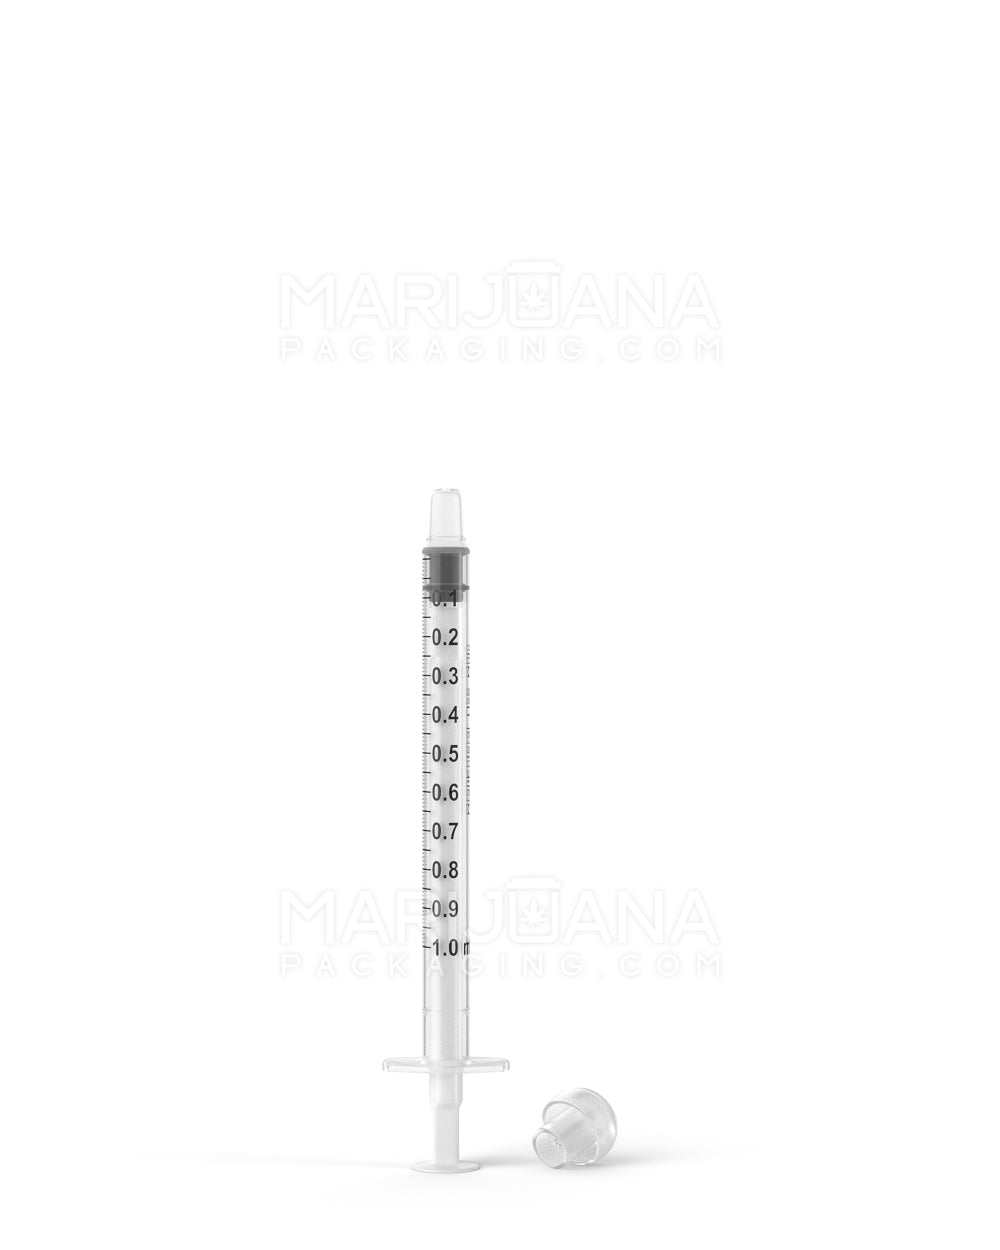 Plastic Oral Concentrate Syringes | 1mL - 0.1mL Increments | Sample - 9